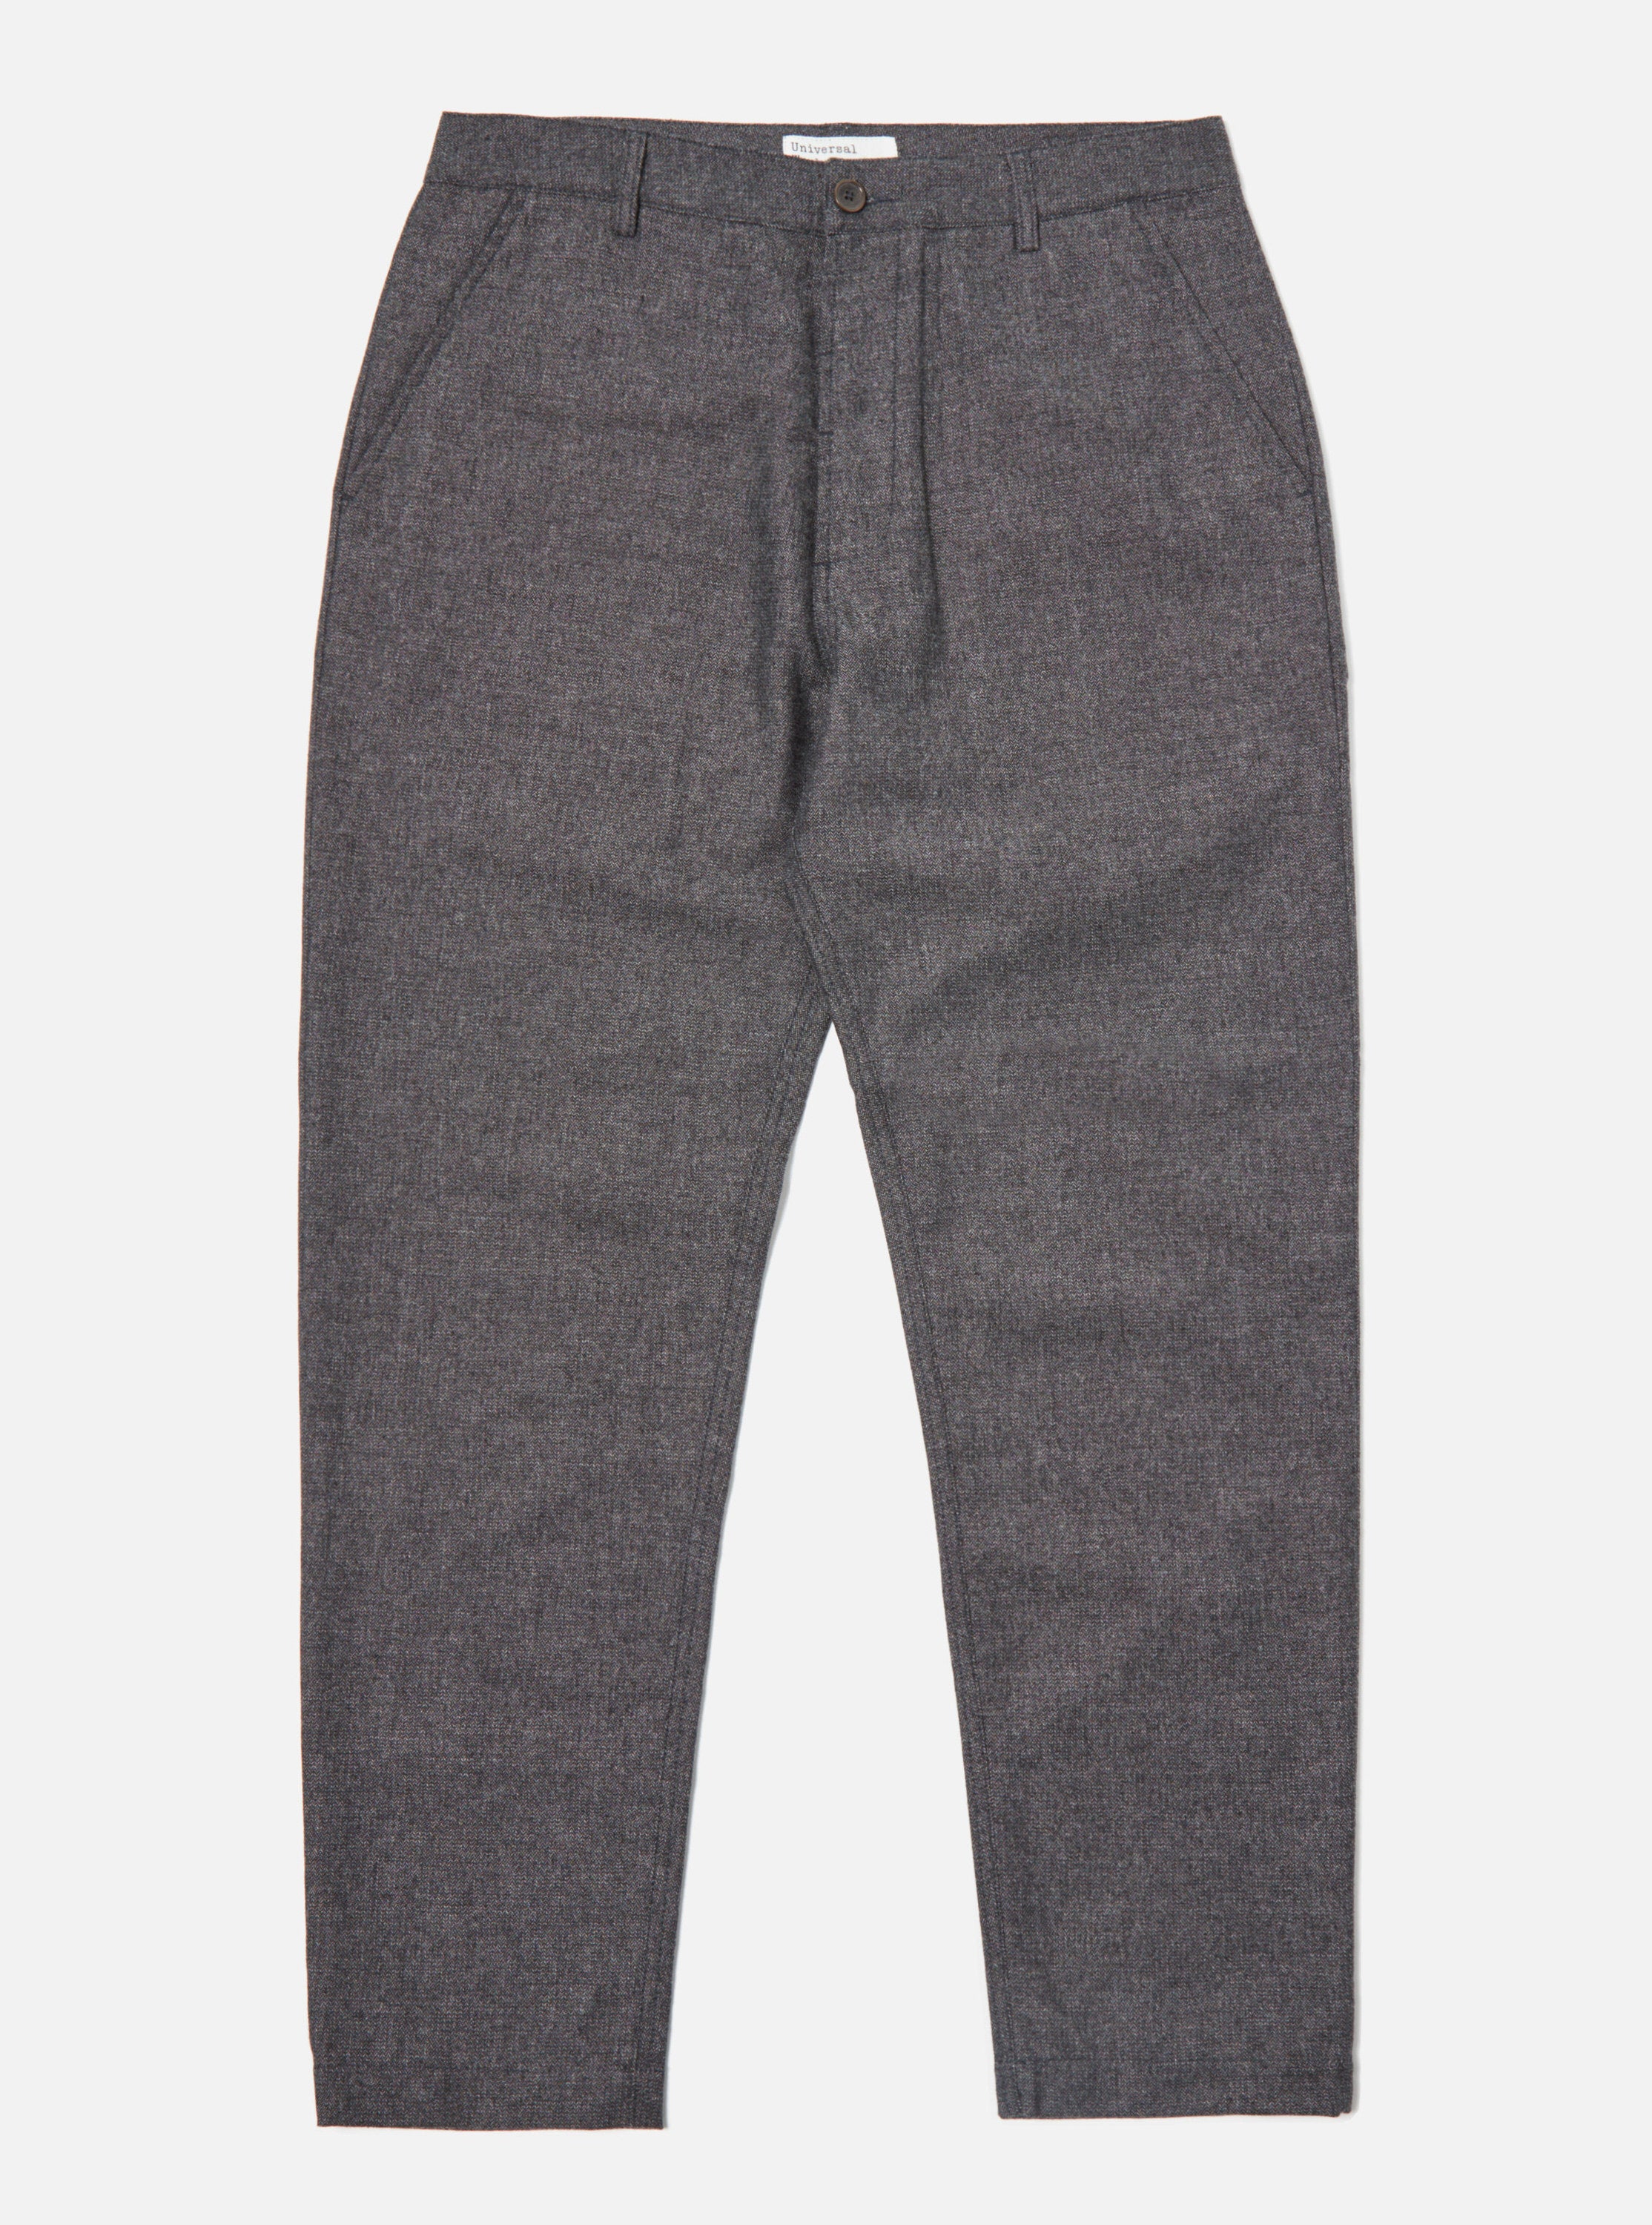 Universal Works Military Chino in Grey Upcycled Italian Tweed